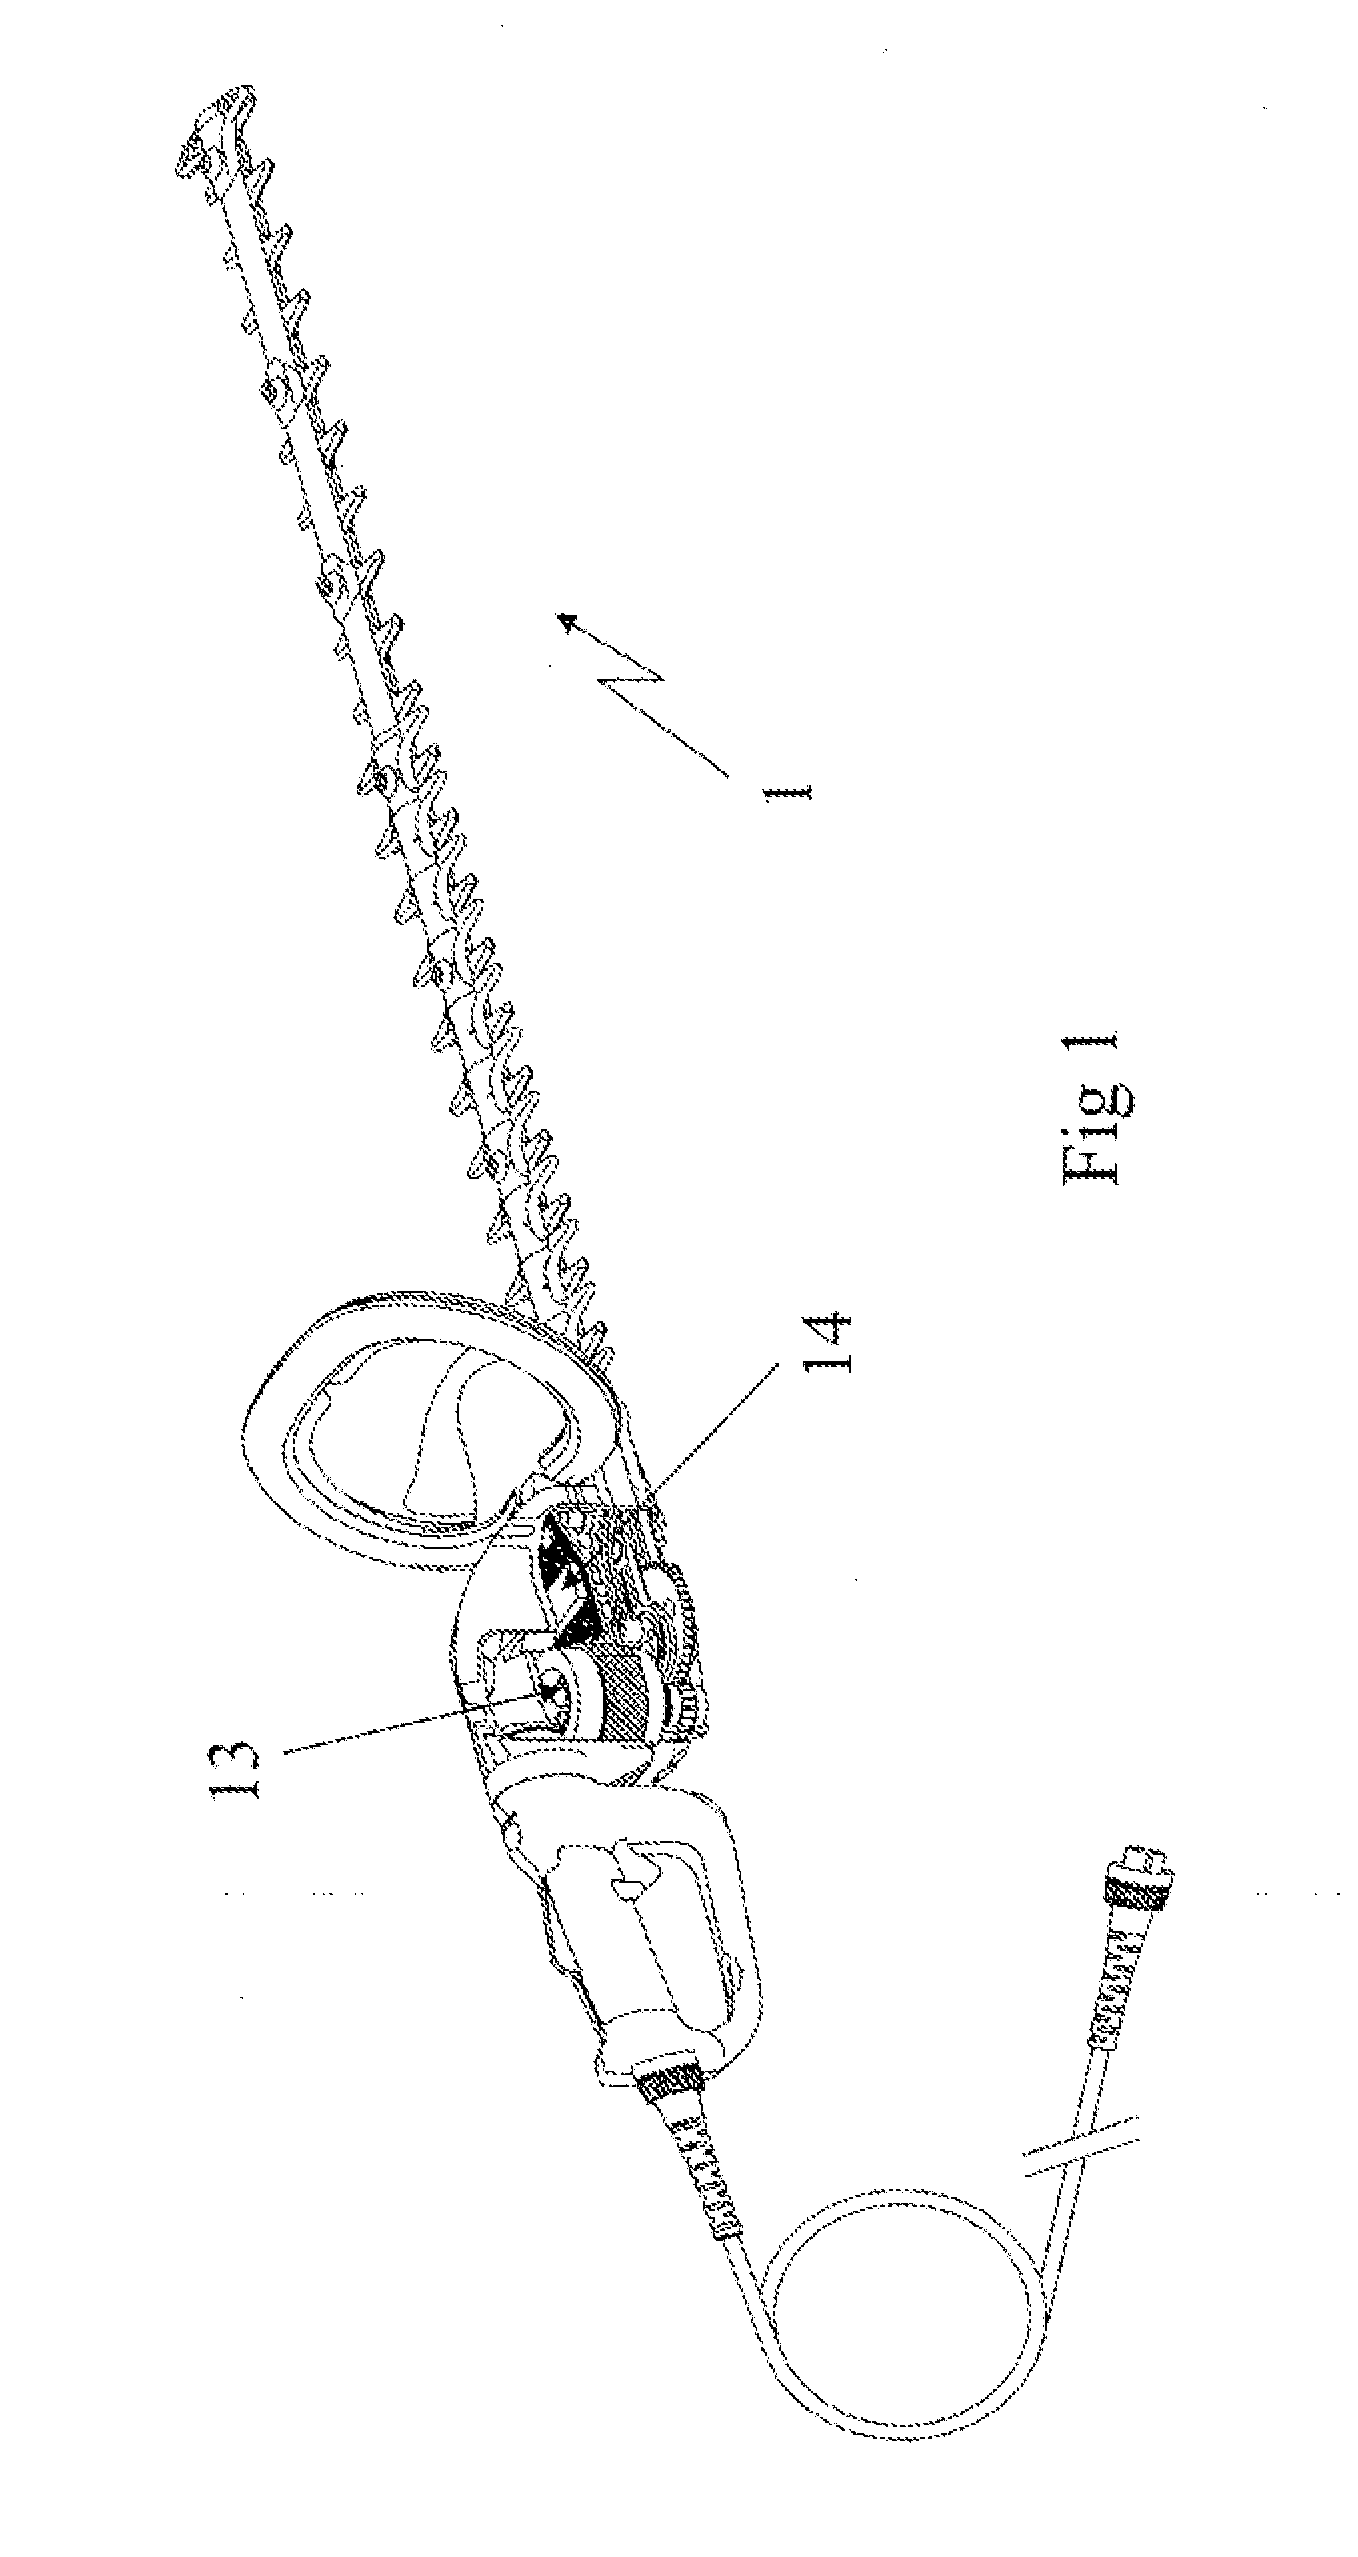 Self-unjamming motorized trimming apparatus, particularly a hedge trimmer